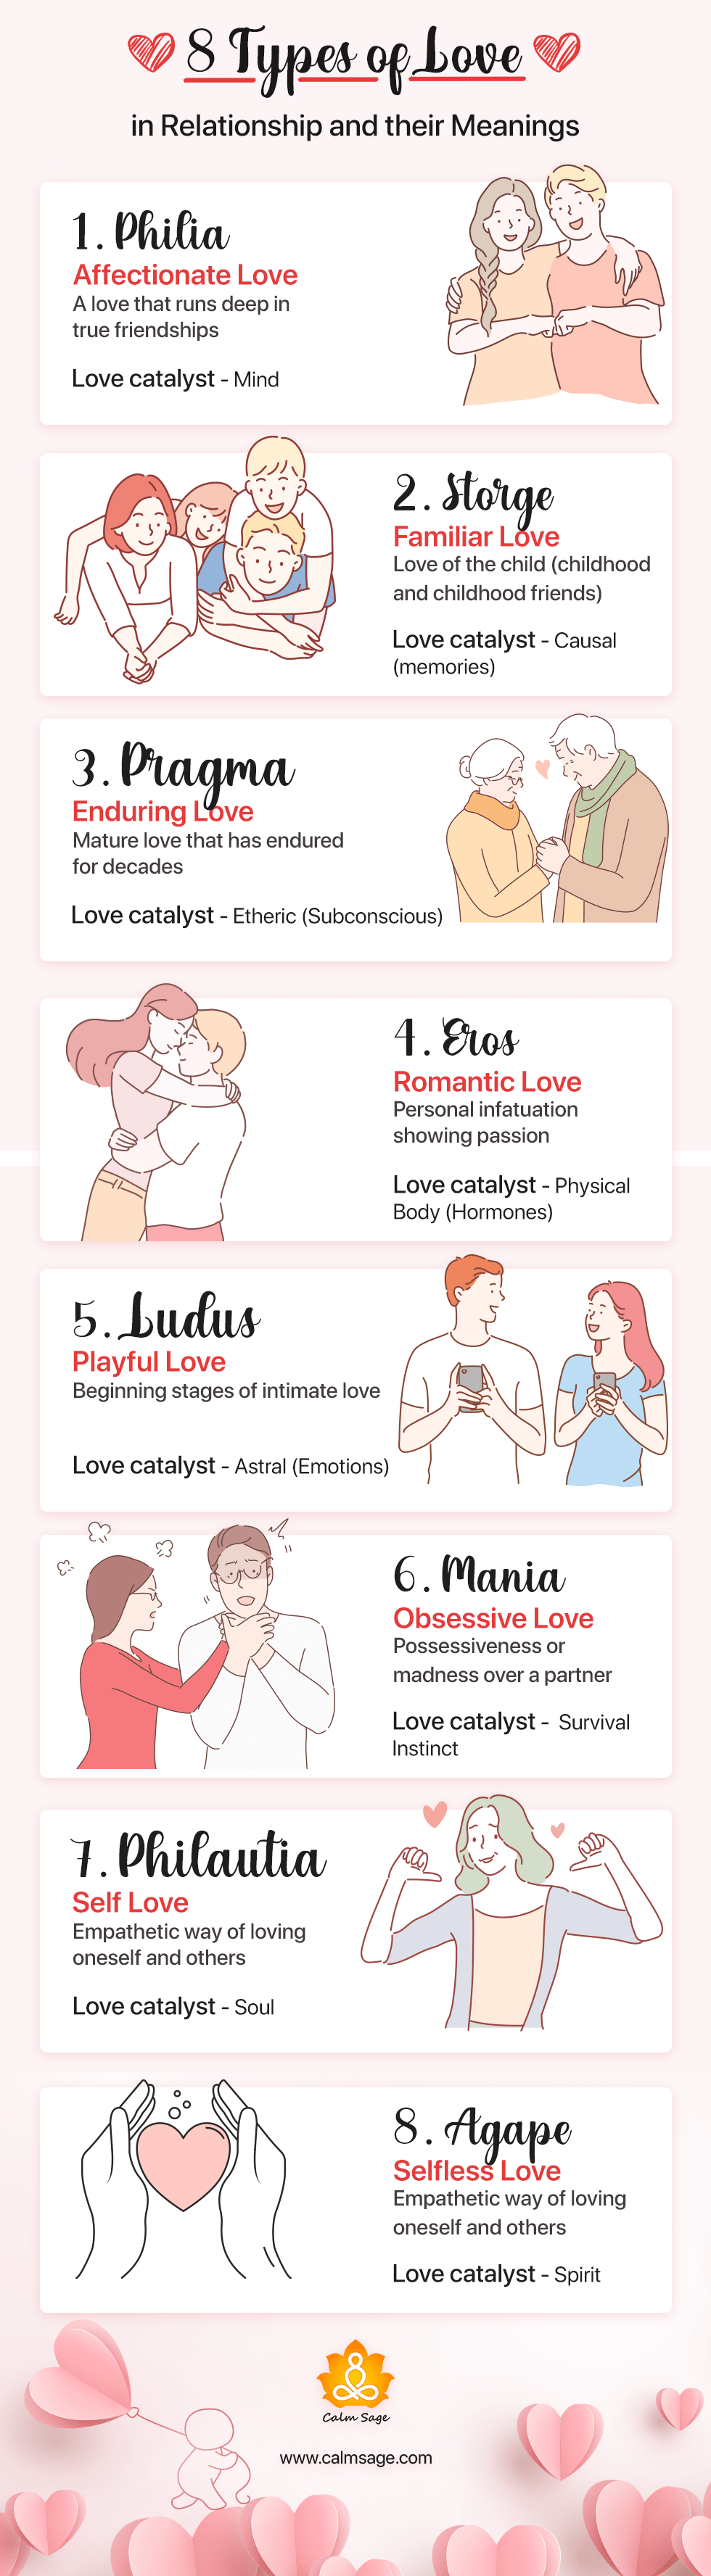 types of relationships